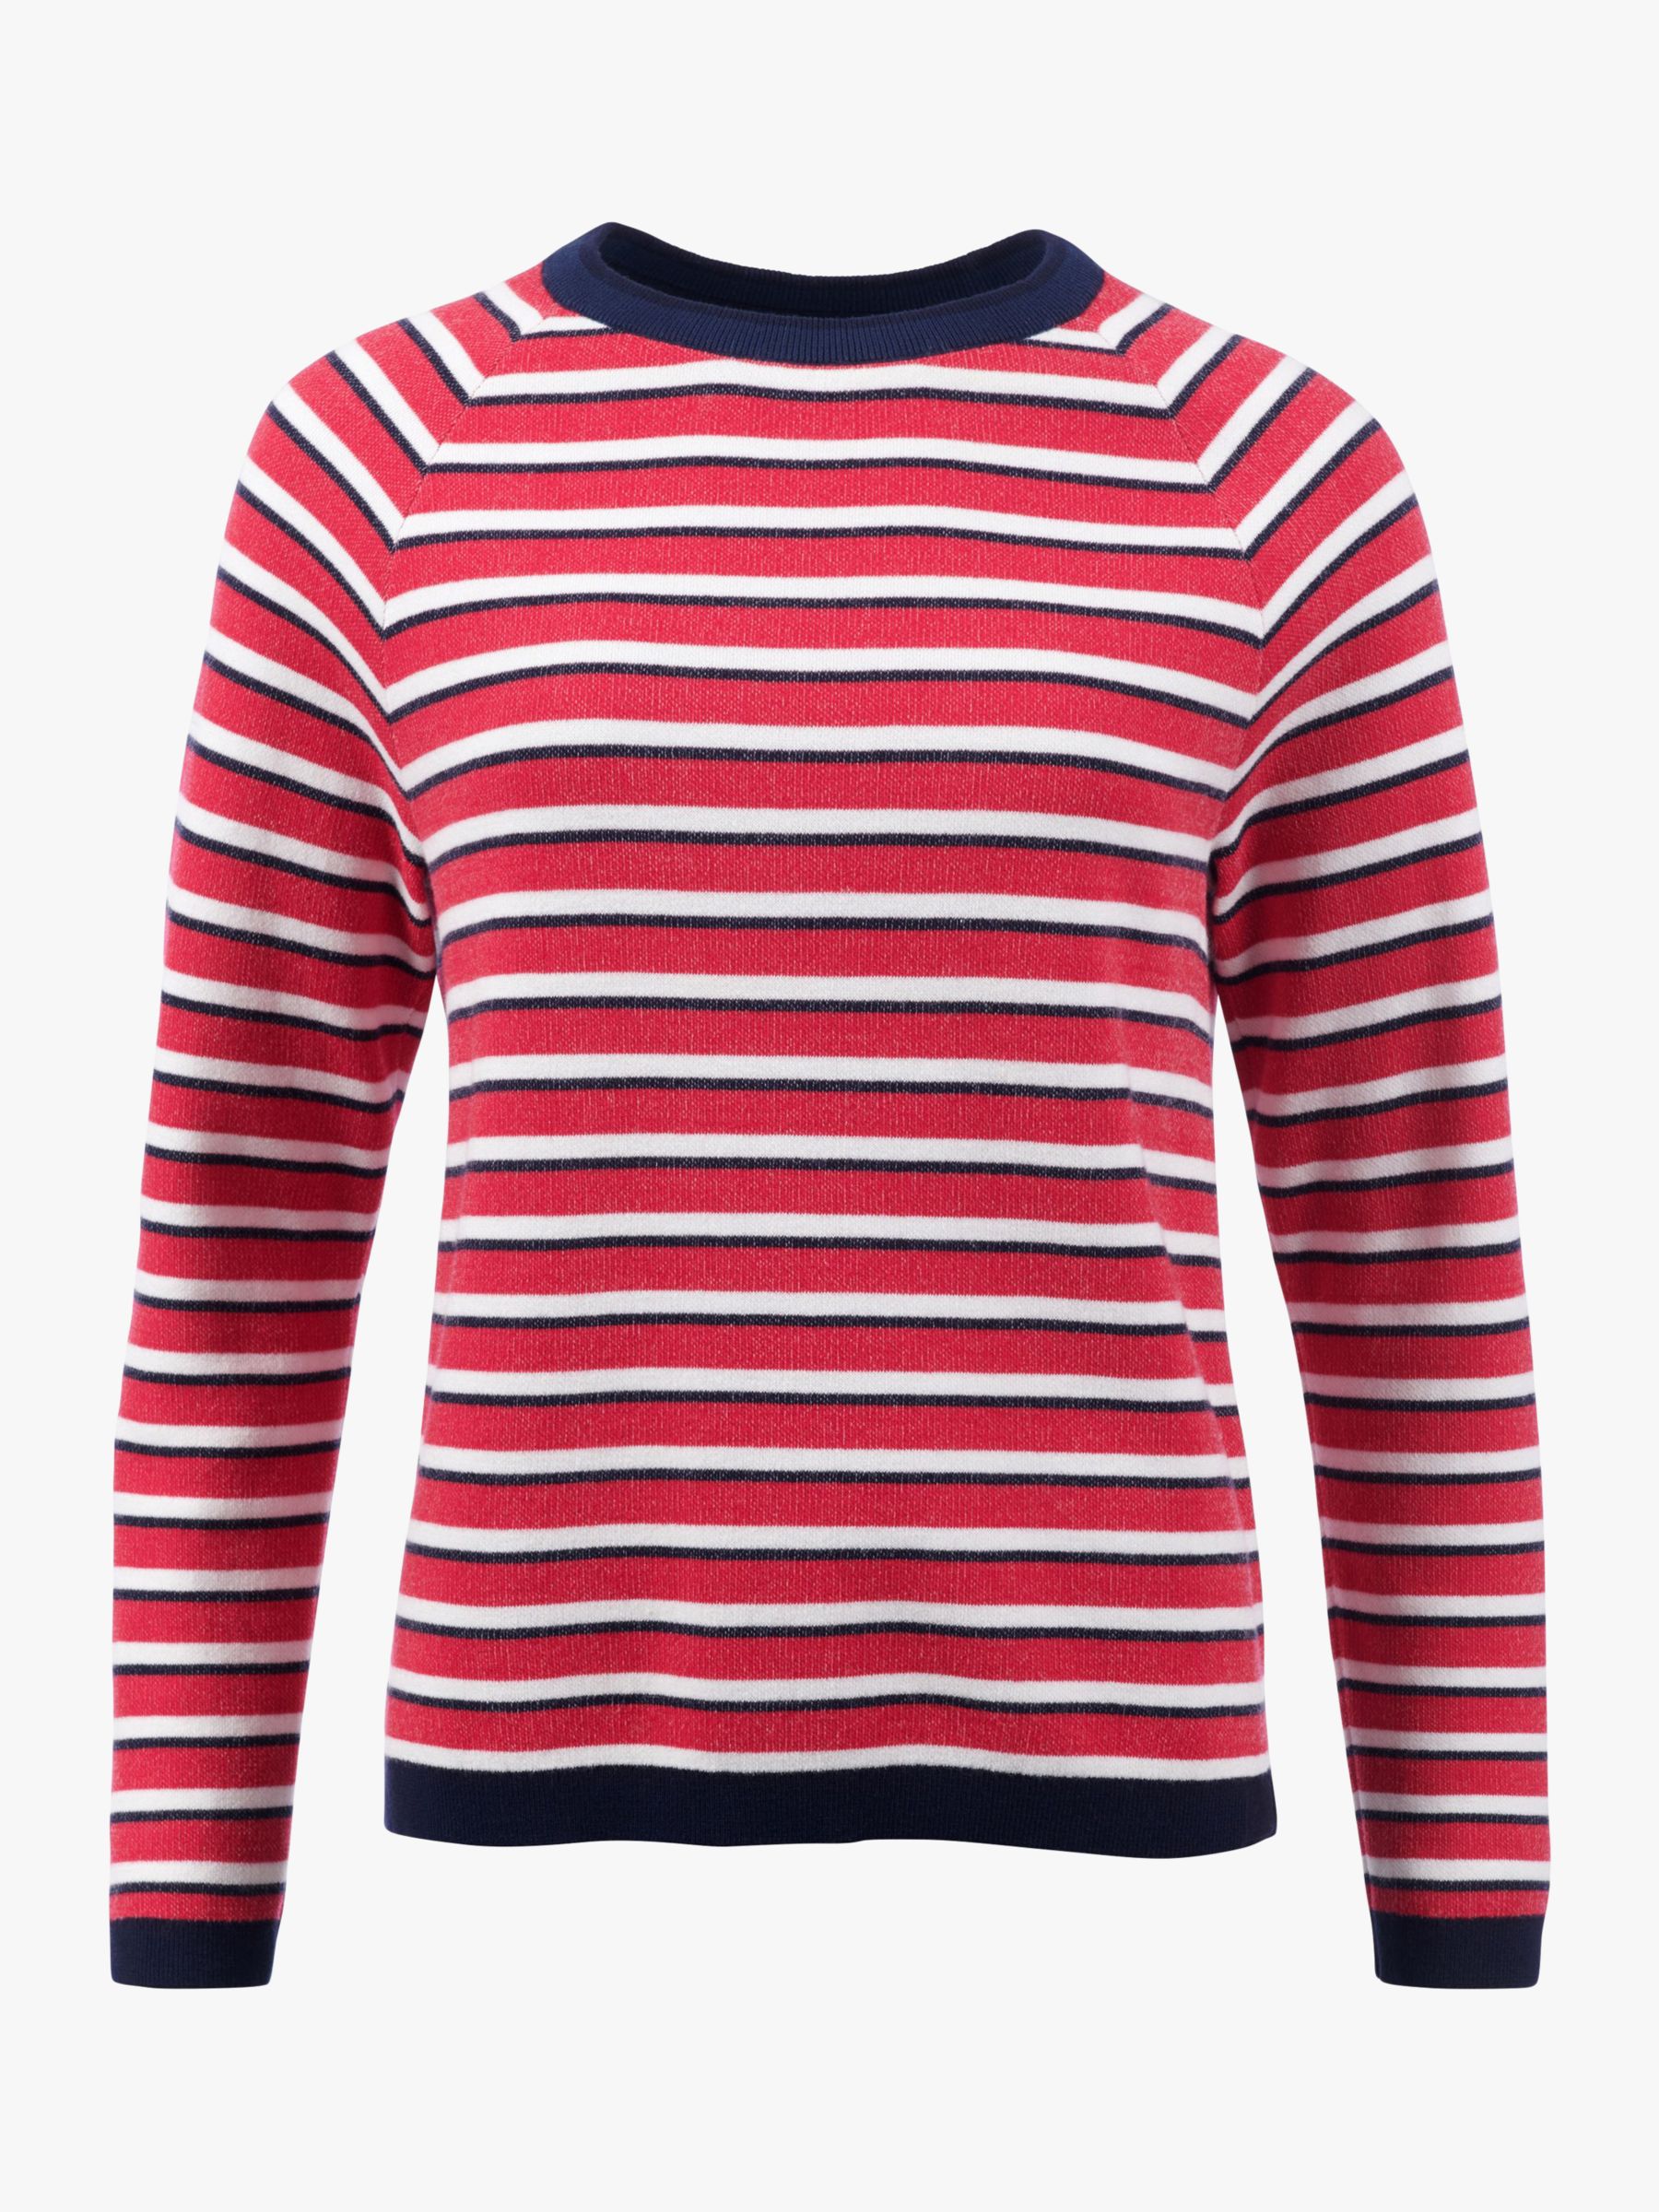 Crew Clothing Emelia Striped Jumper, Red at John Lewis & Partners